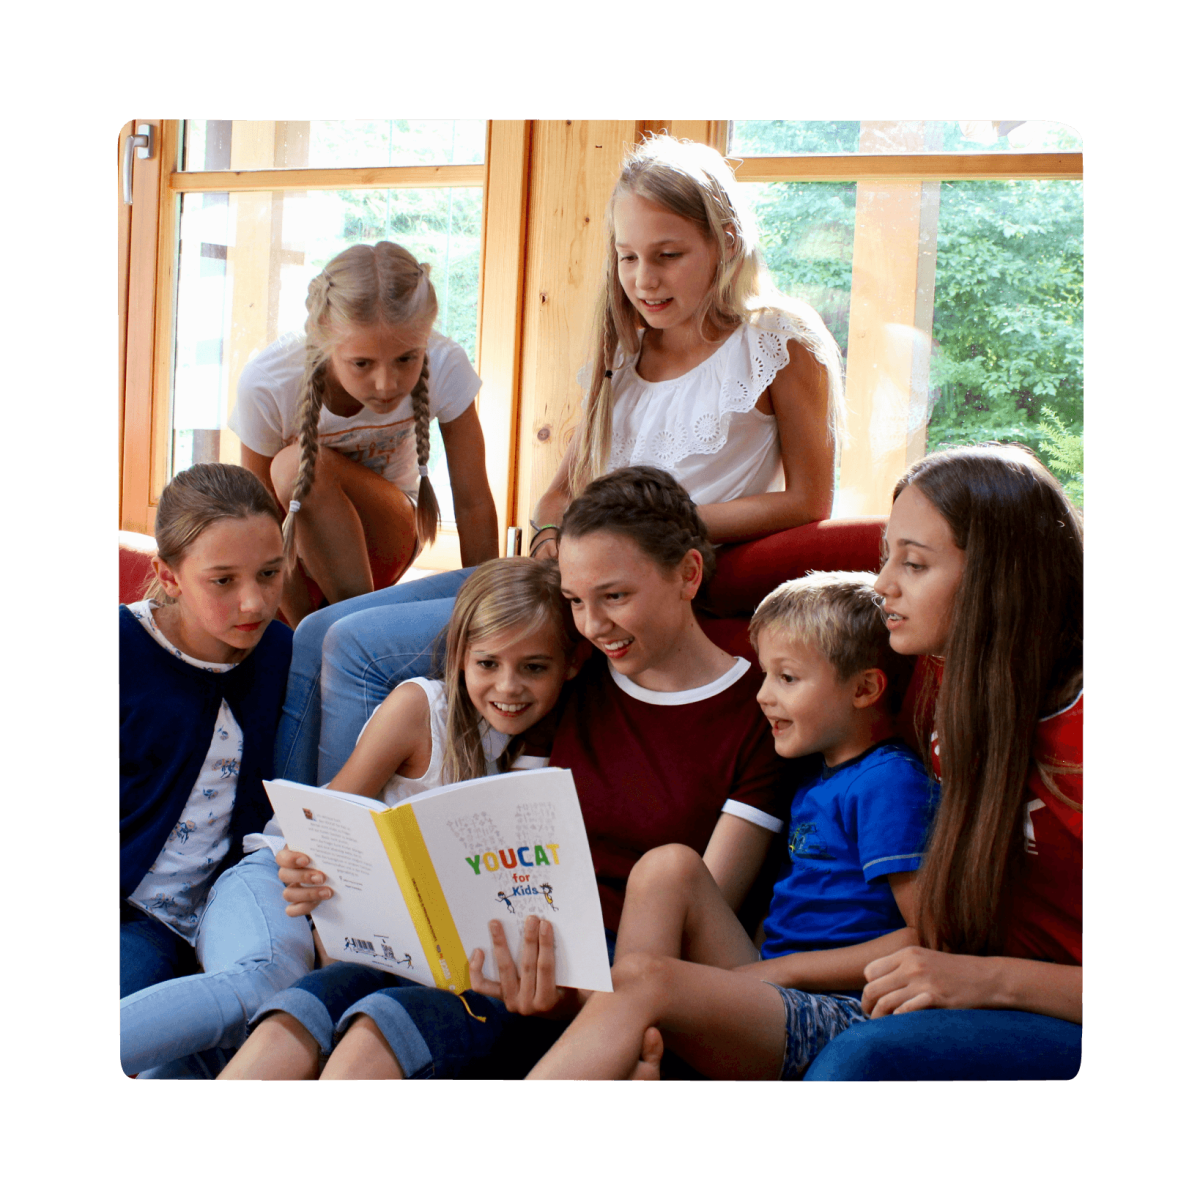 group of children reading youcat for kids book together